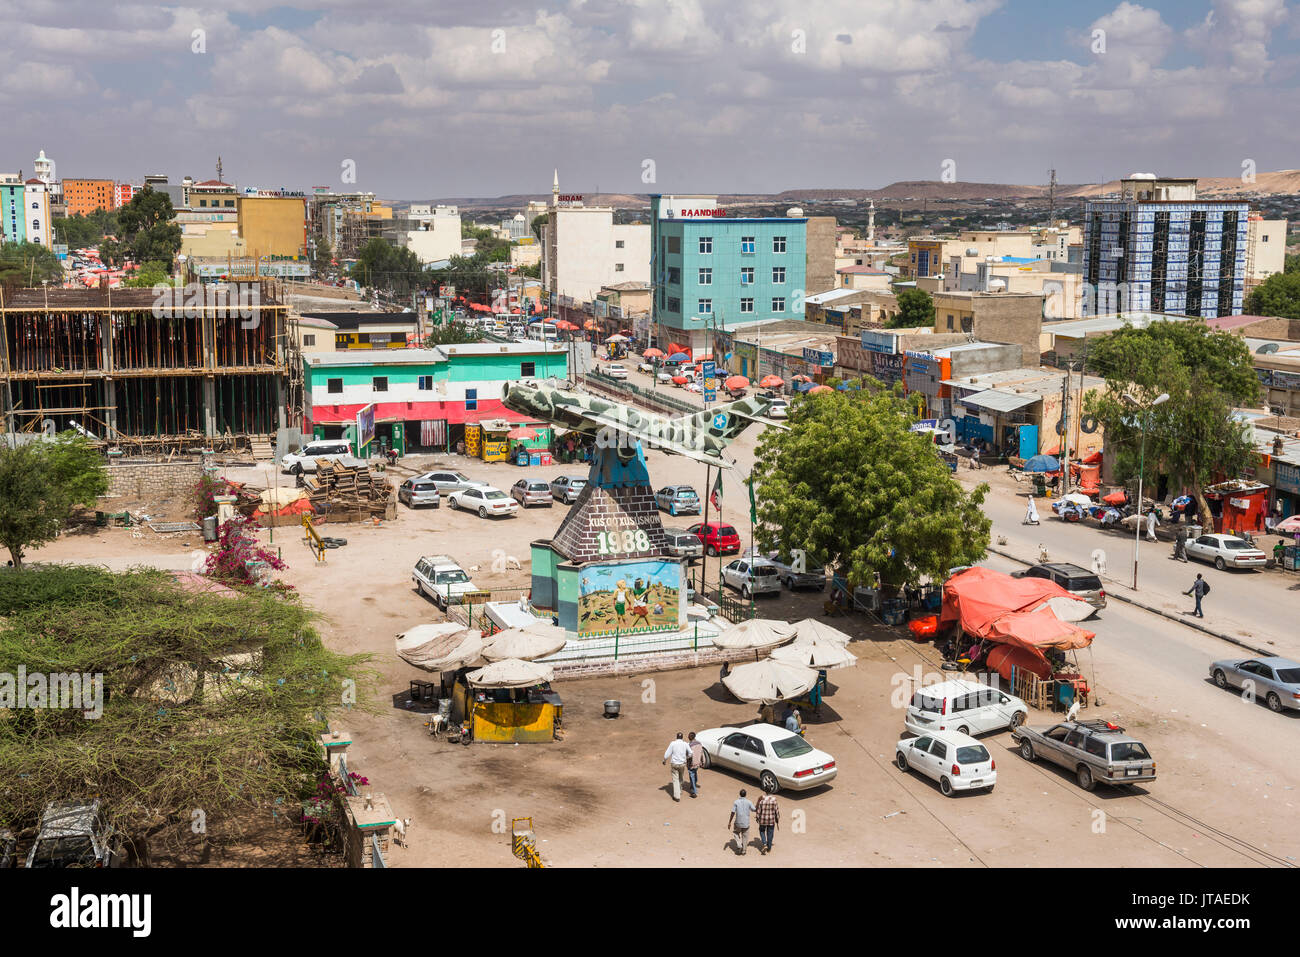 View over Hargeisa with an old MIG airplane in the center, Somaliland, Somalia, Africa Stock Photo